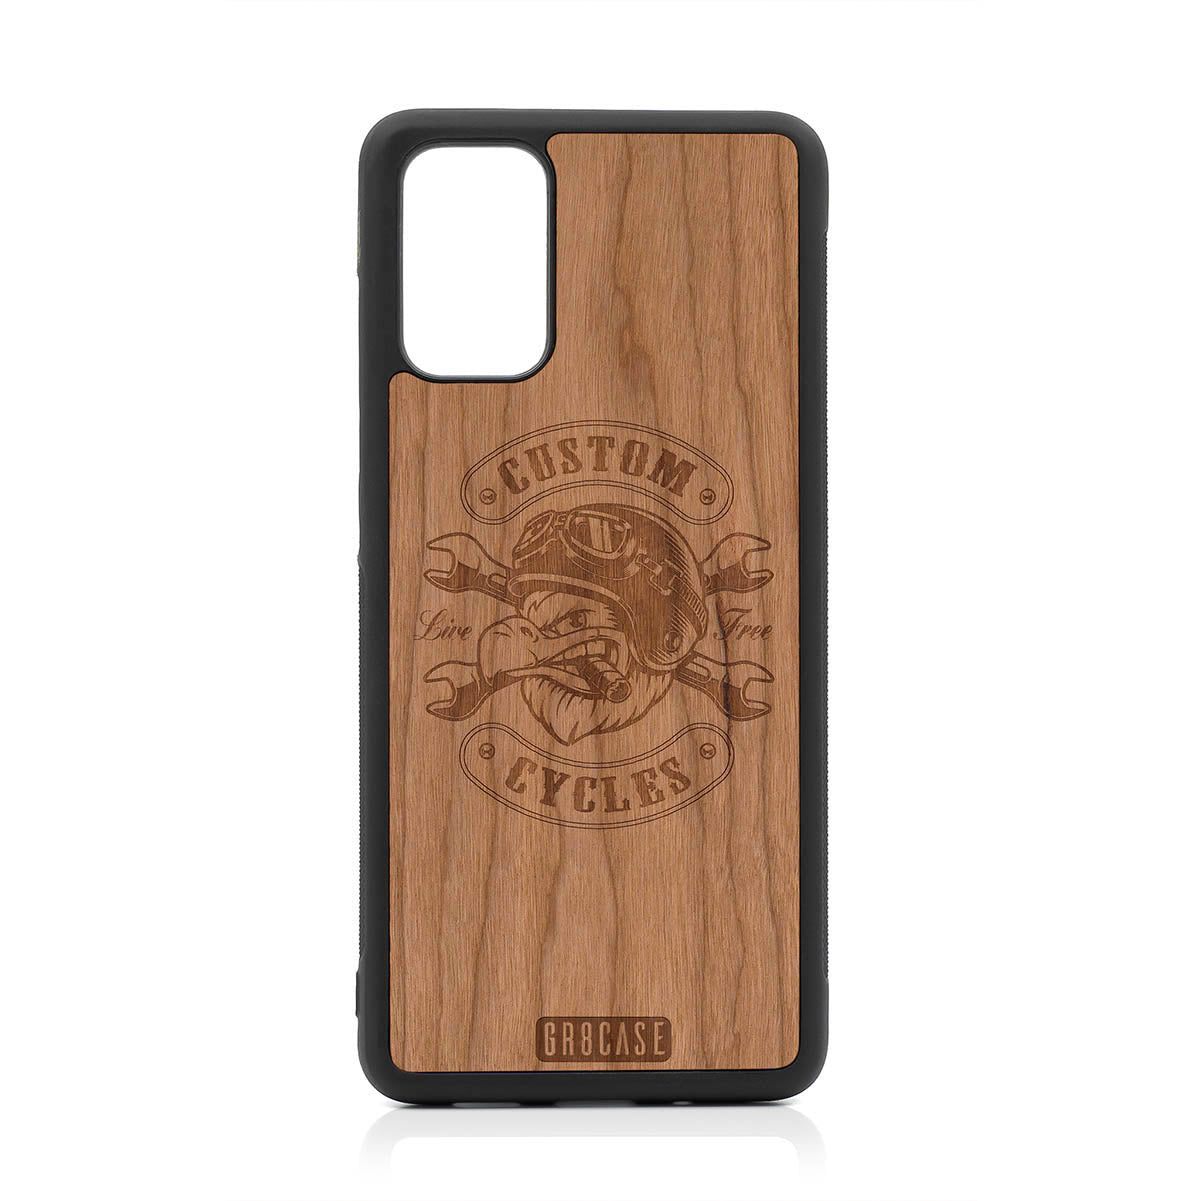 Custom Cycles Live Free (Biker Eagle) Design Wood Case For Samsung Galaxy S20 Plus by GR8CASE